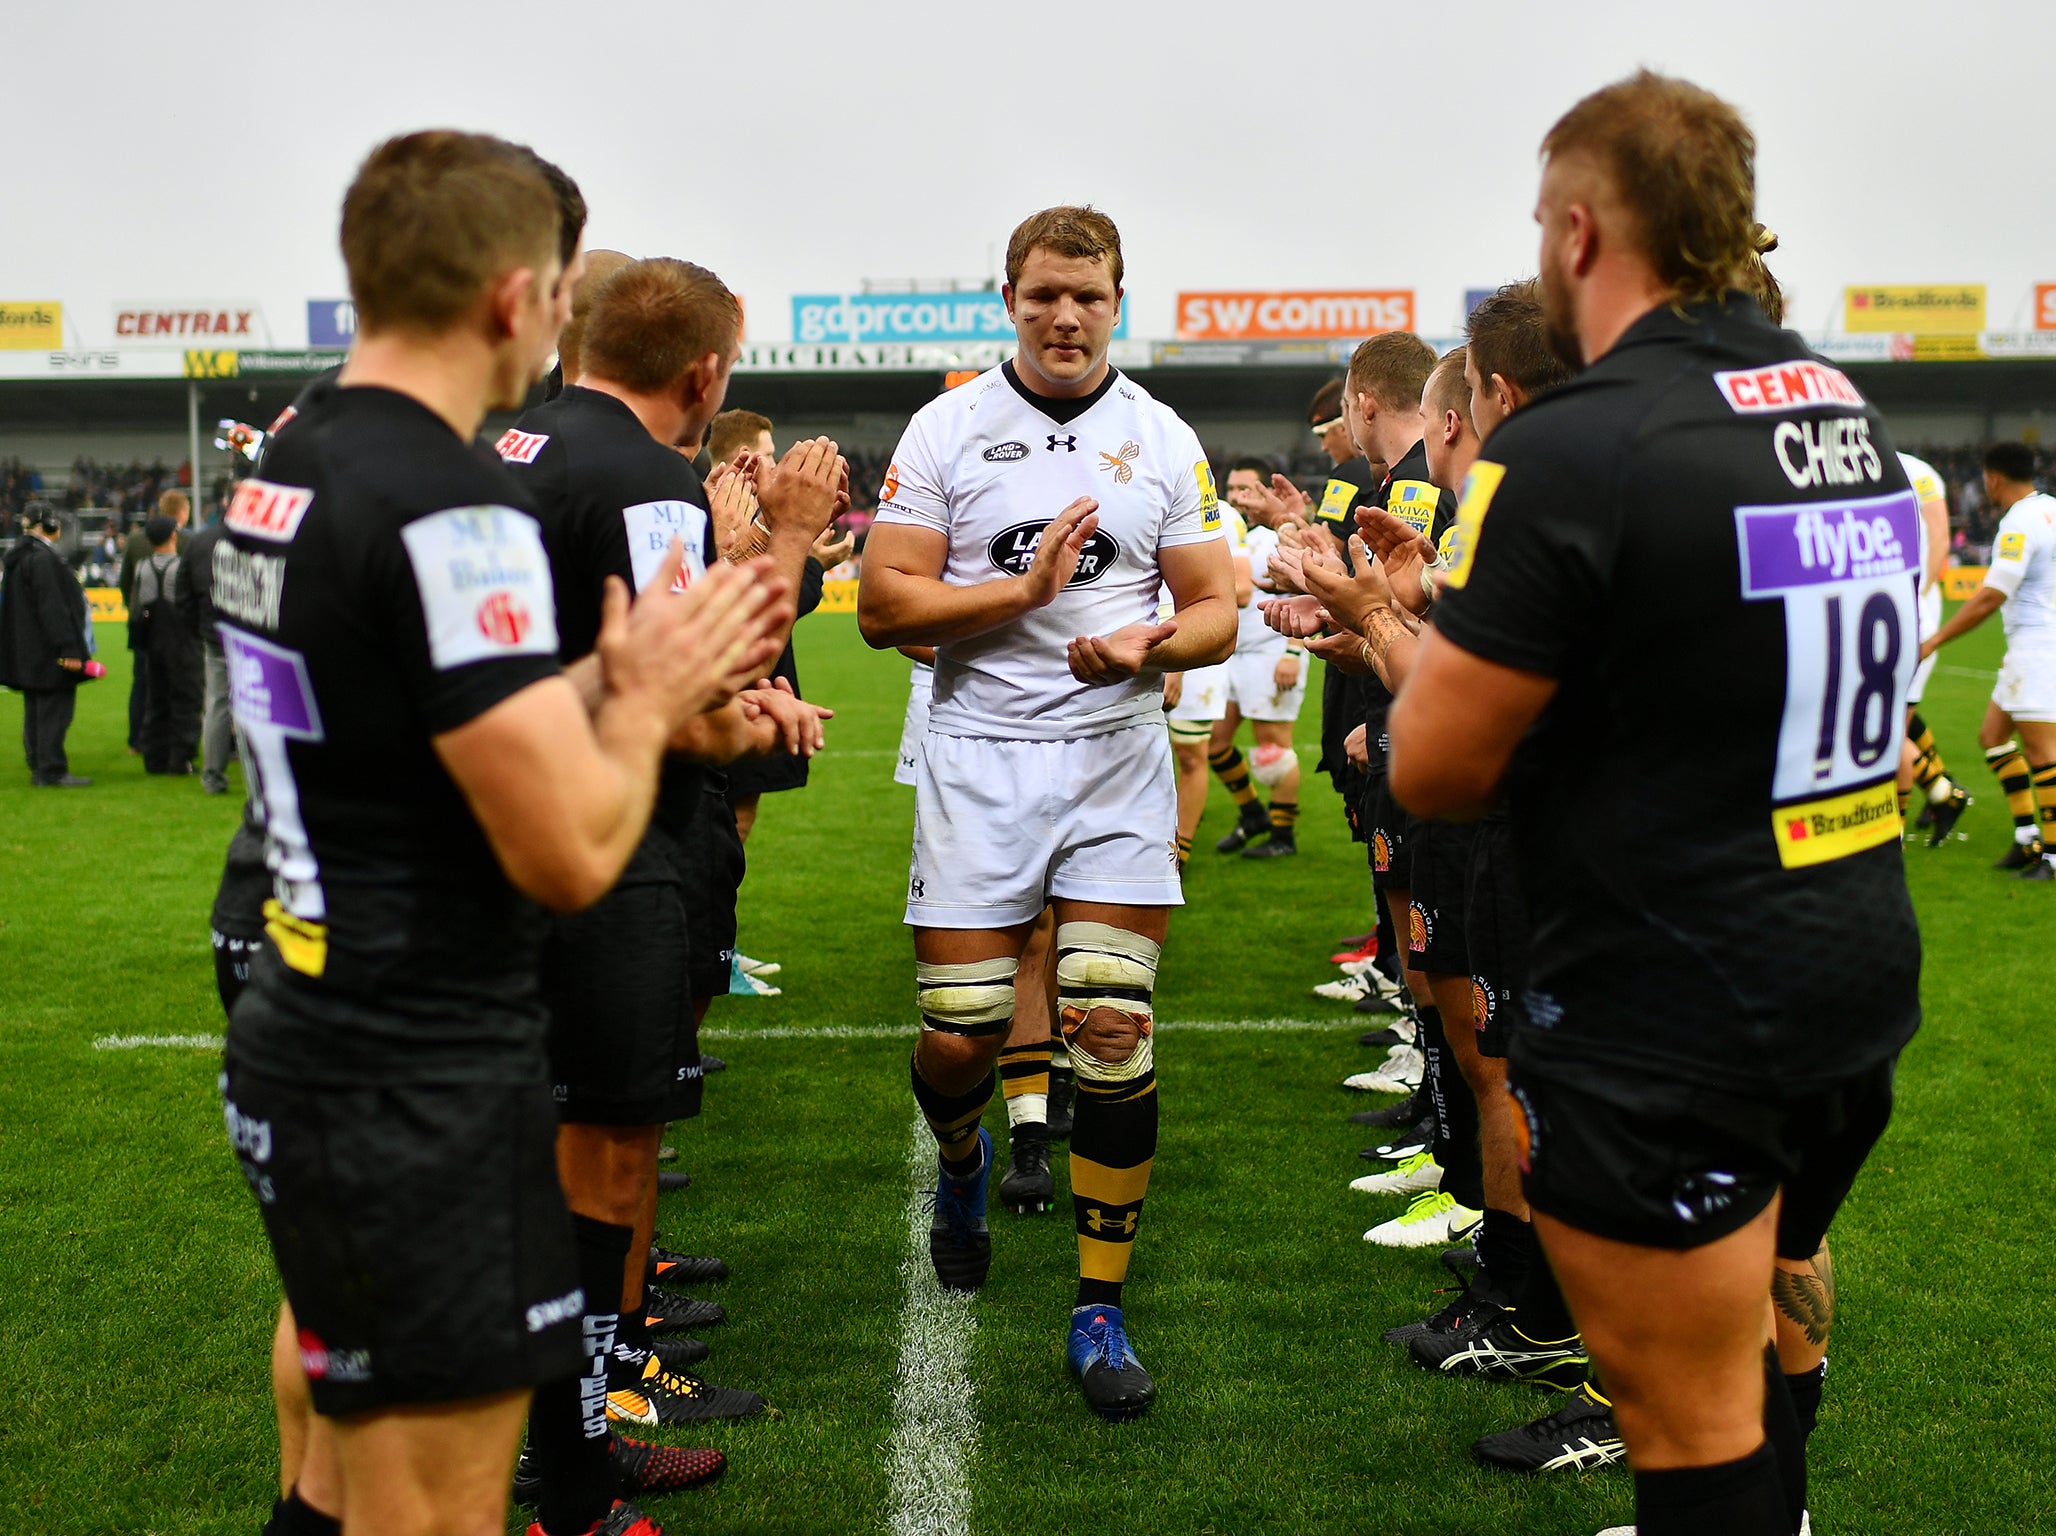 Joe Launchbury of Wasps leads his team off the field following